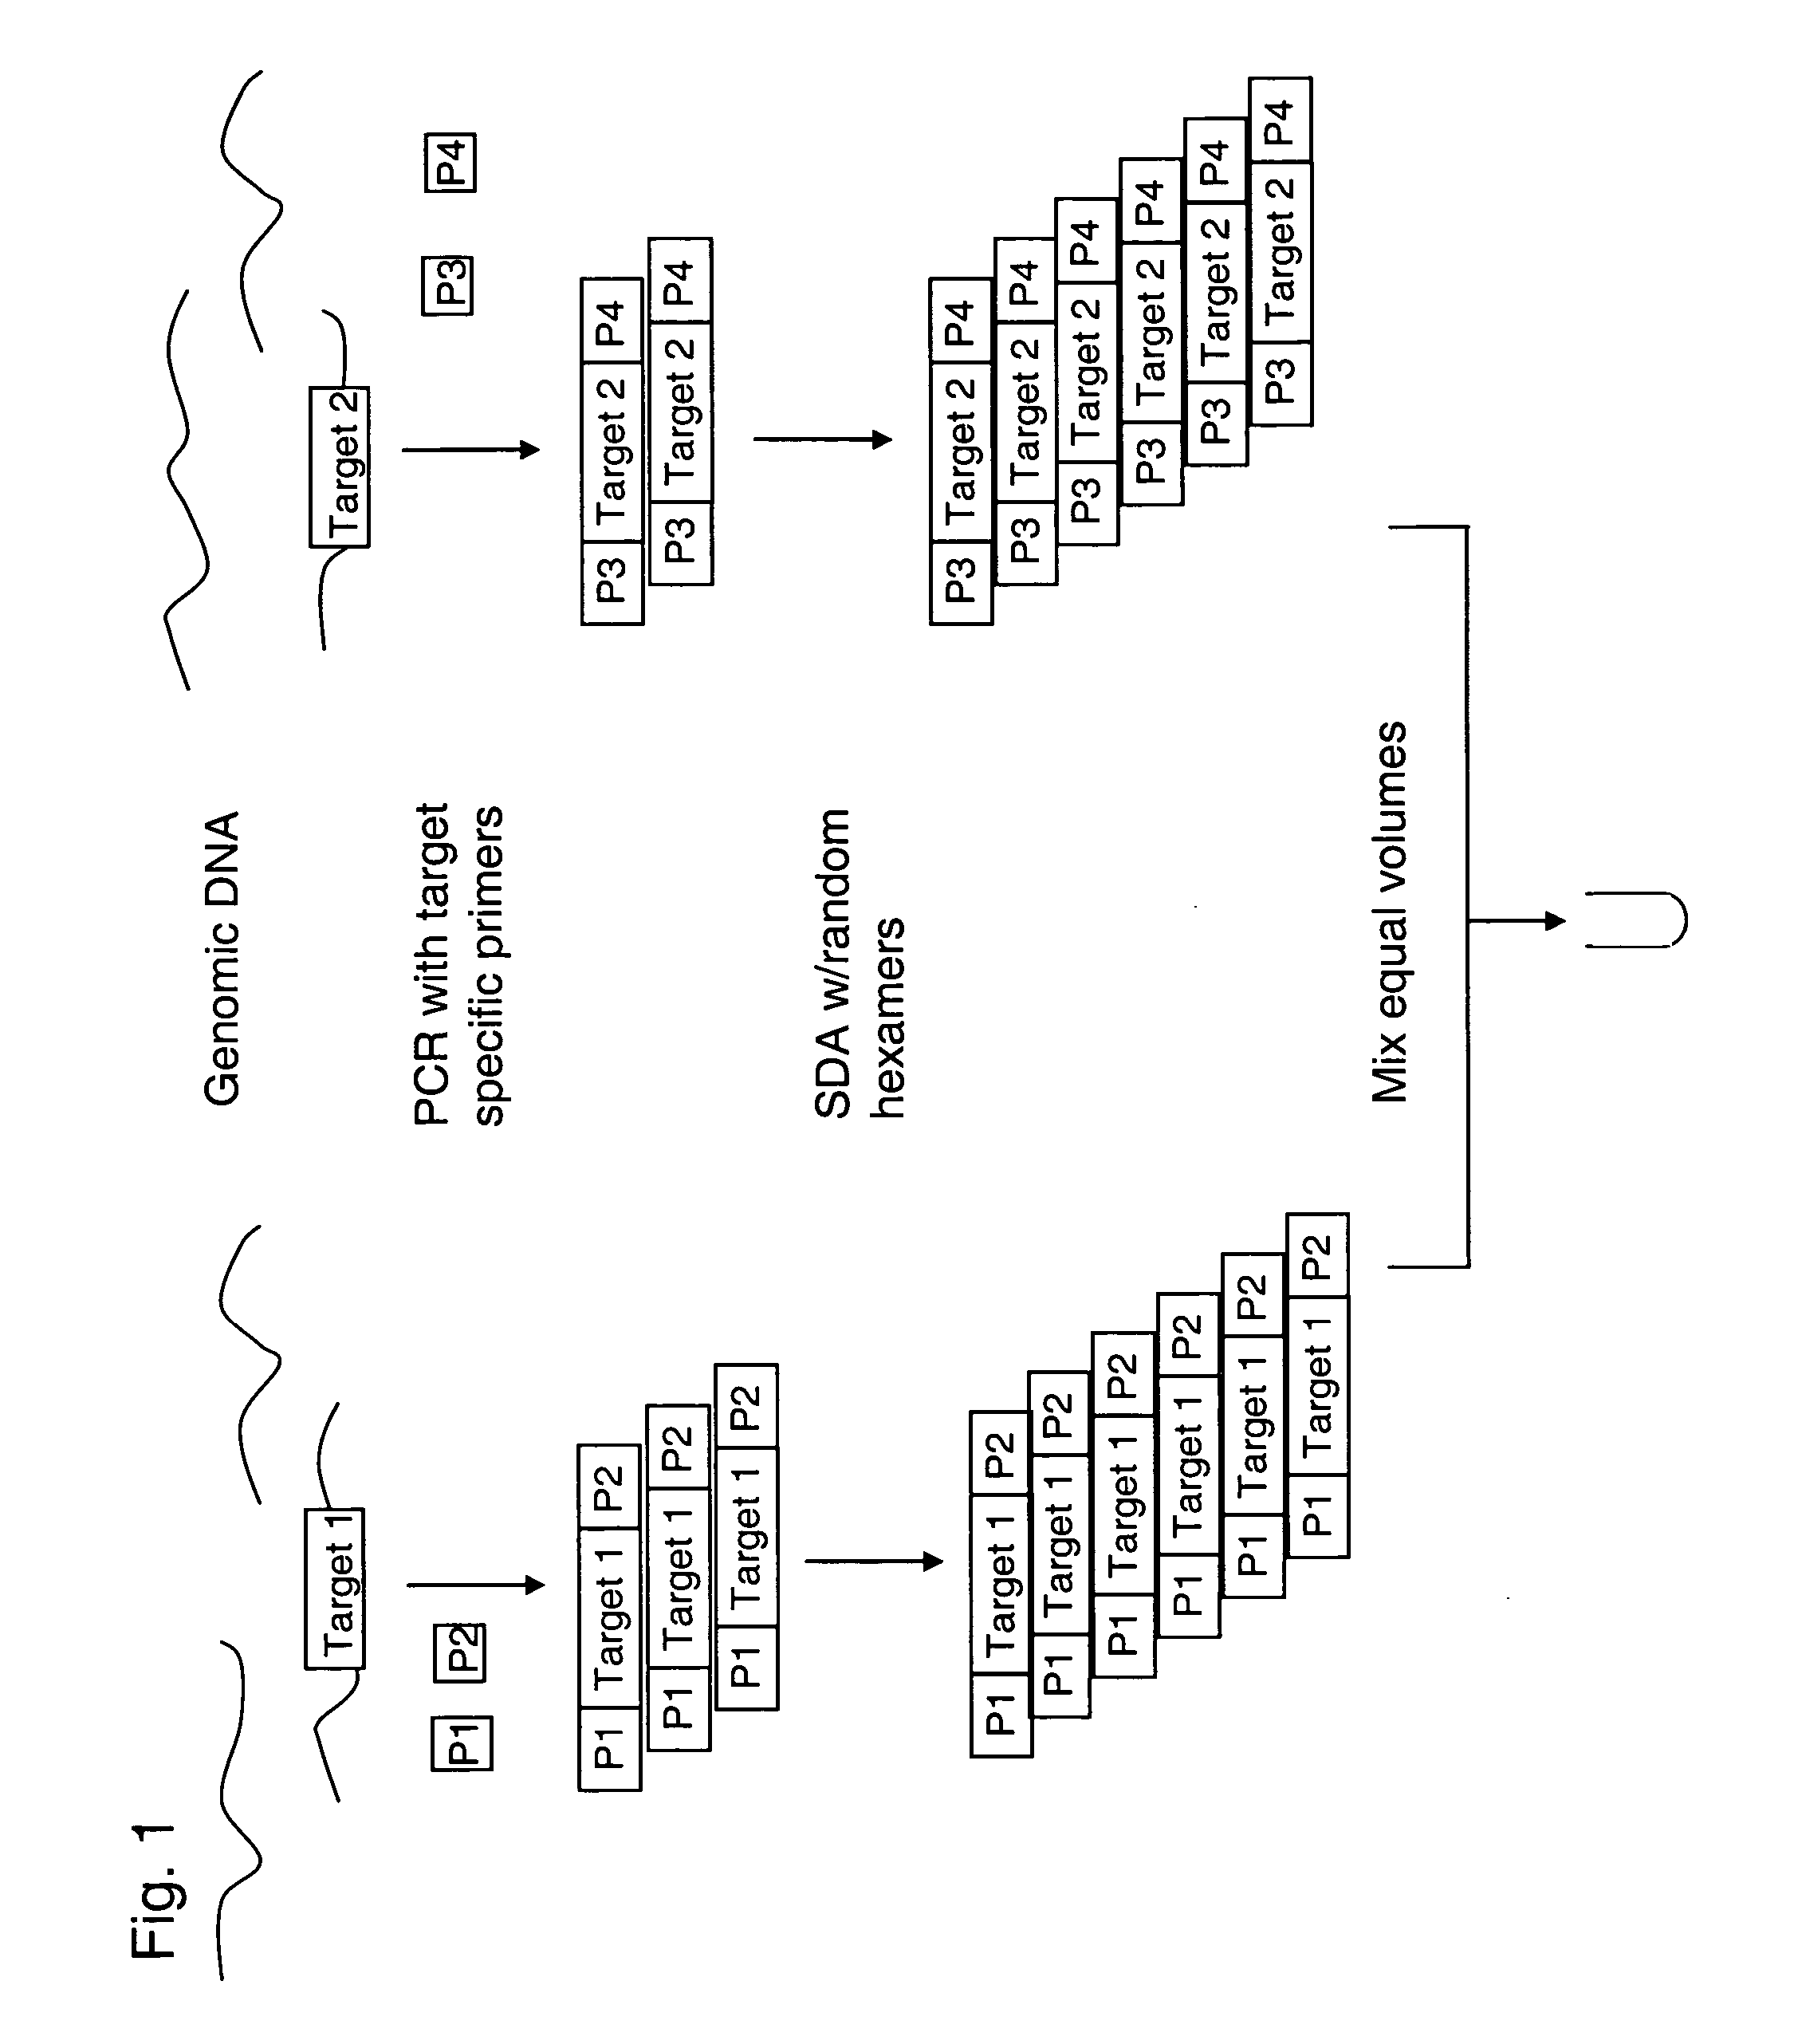 Methods for normalized amplification of nucleic acids